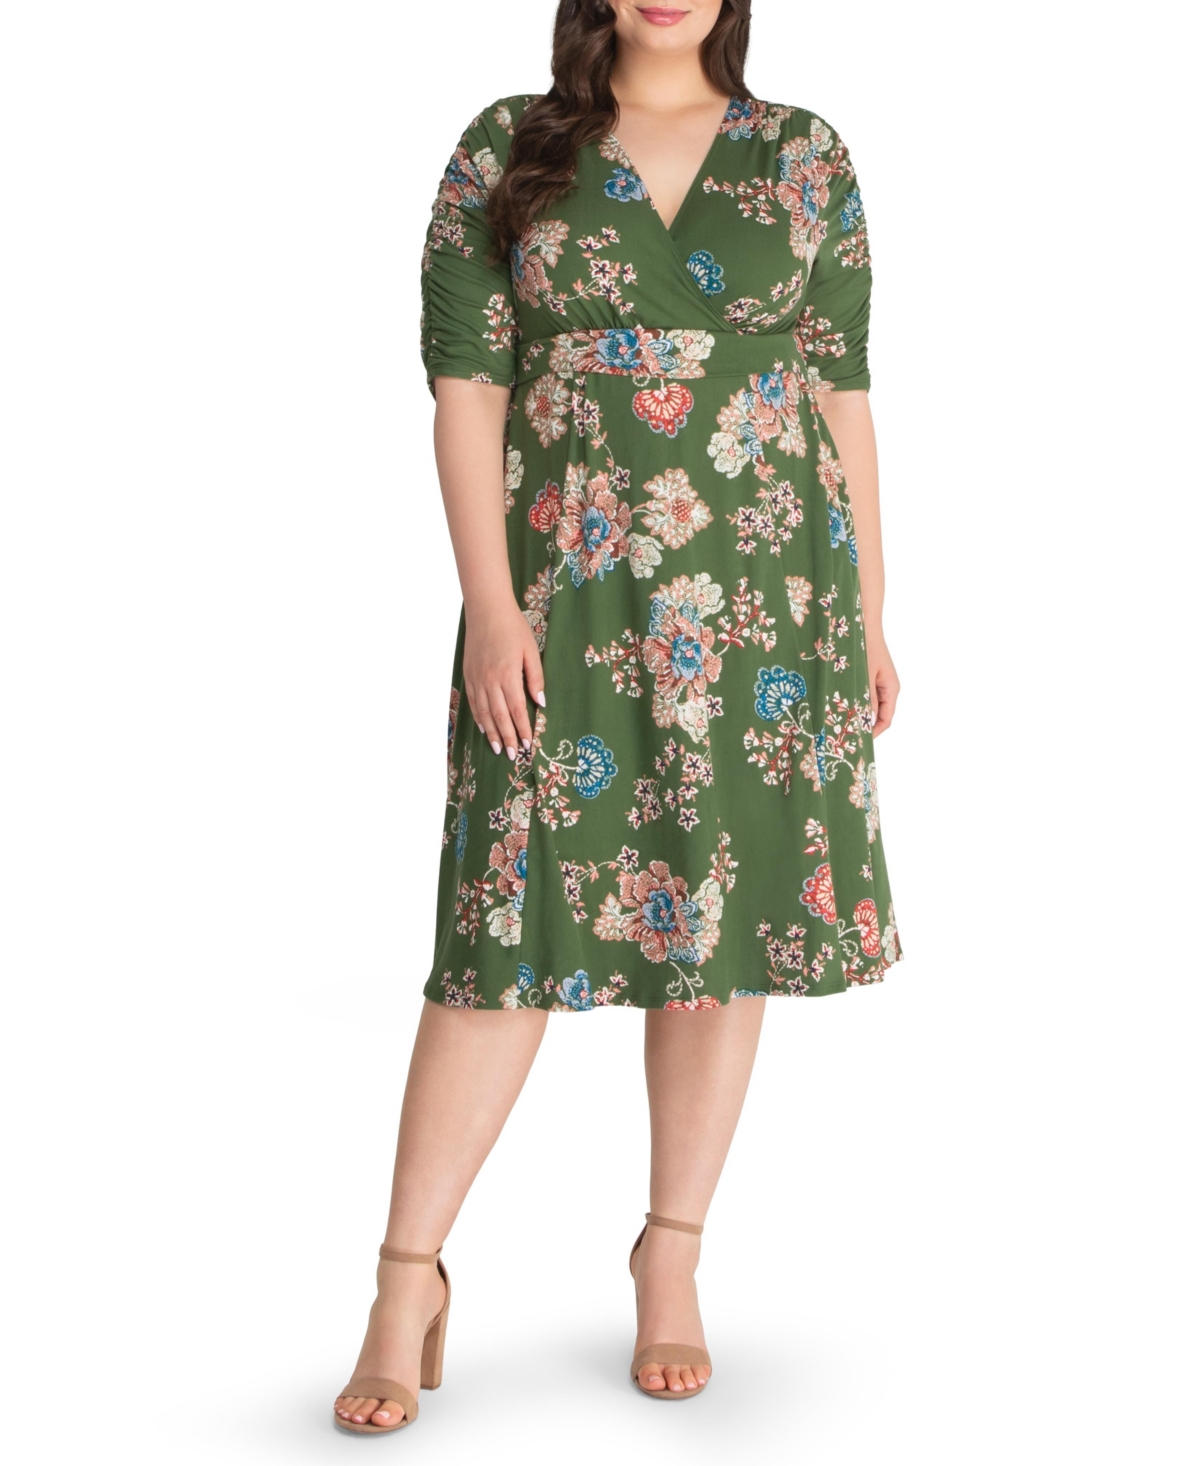 Women's Plus Size Gabriella Ruched Sleeve Midi Dress with Pockets - Olive floral print